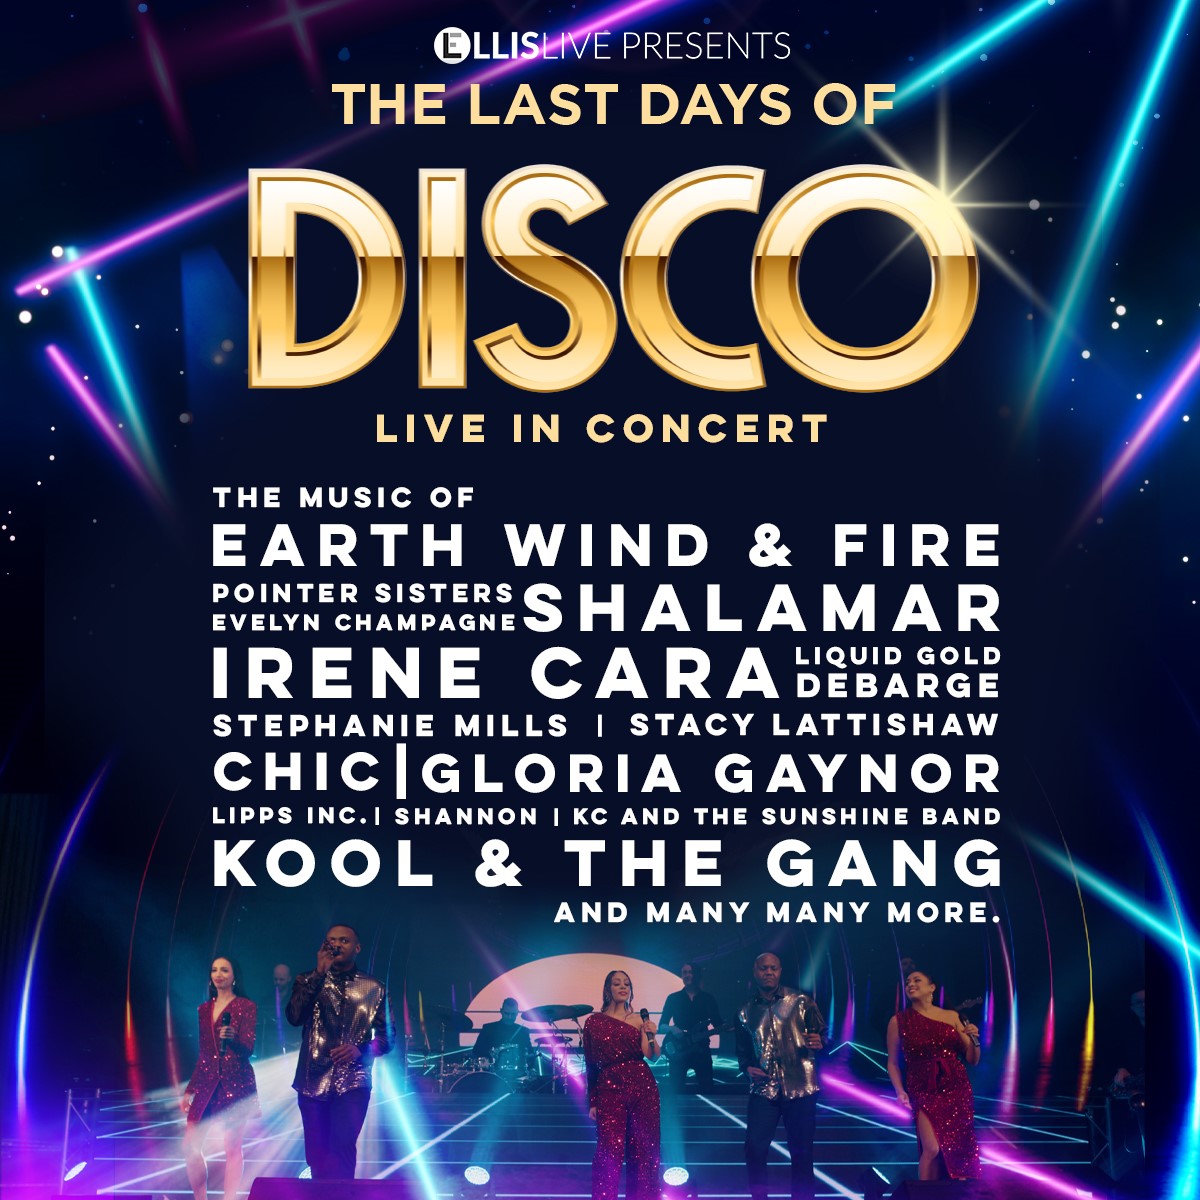 THE LAST DAYS OF DISCO with after show party & DJ on May 24, 19:30@Sutton Coldfield Town Hall - Pick a seat, Buy tickets and Get information on Sutton Coldfield Town Hall 